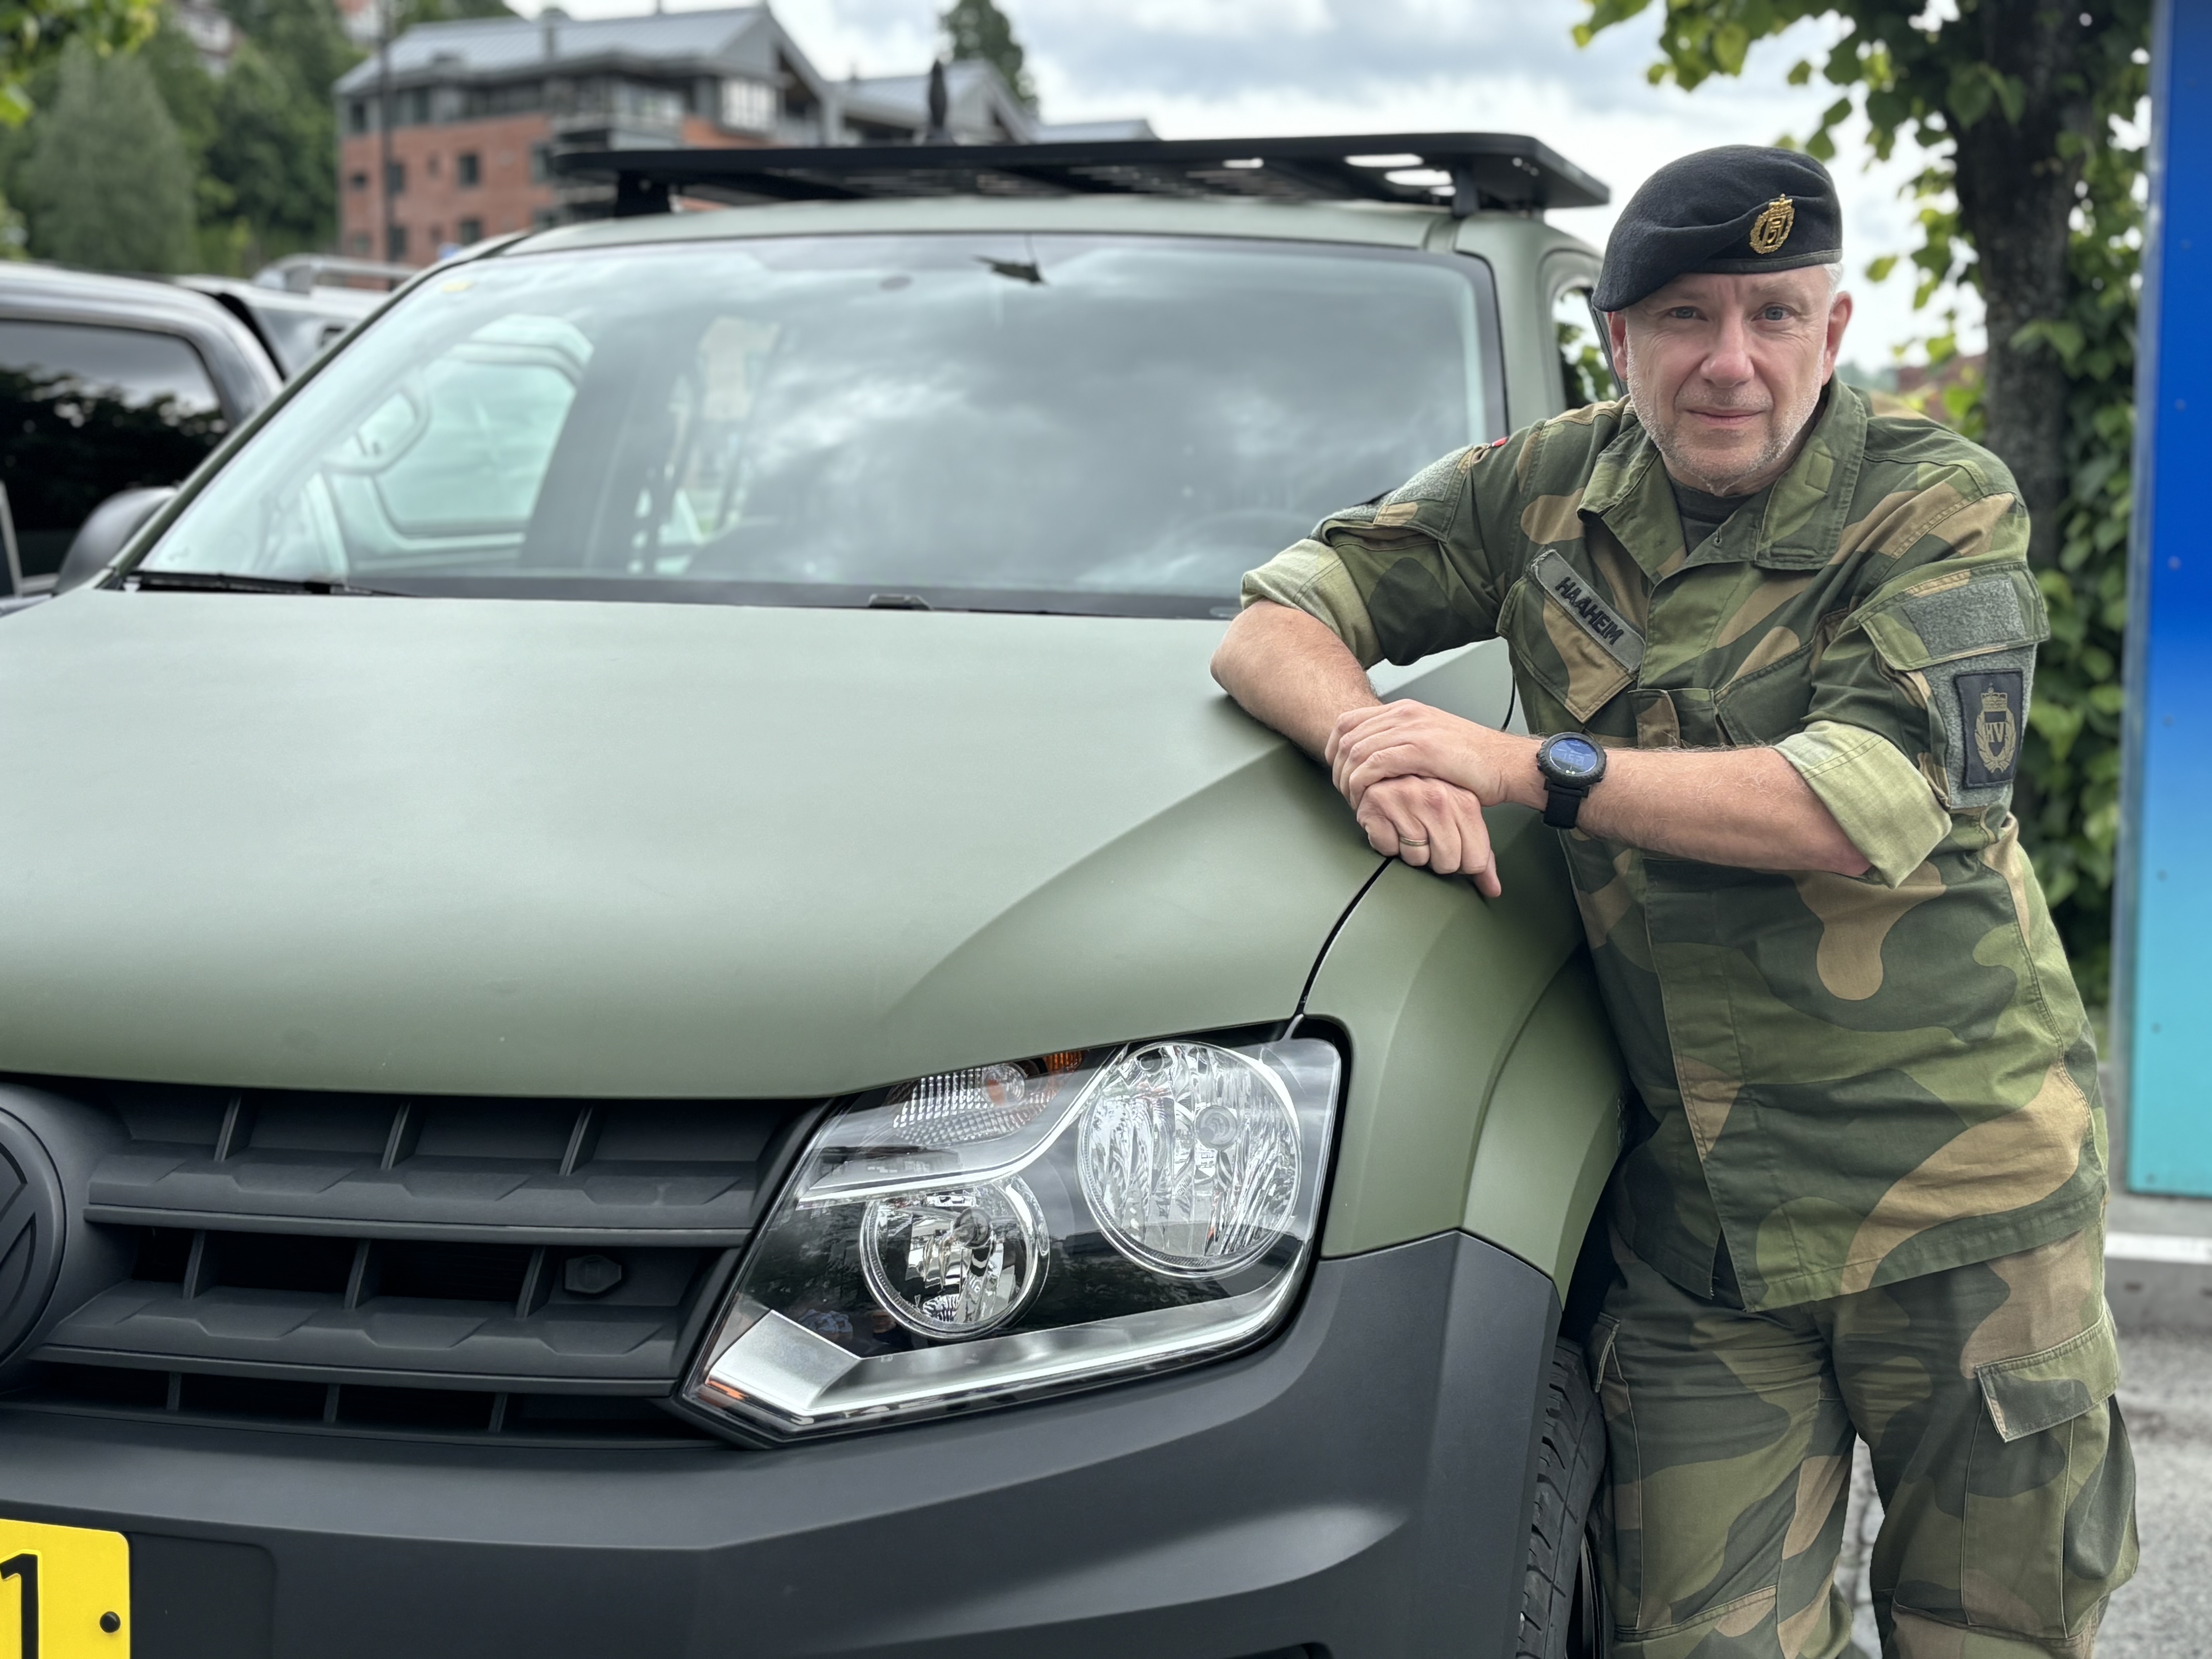 man wearing military uniform, leaning to a military vehicle, posing, sivil traffic in background